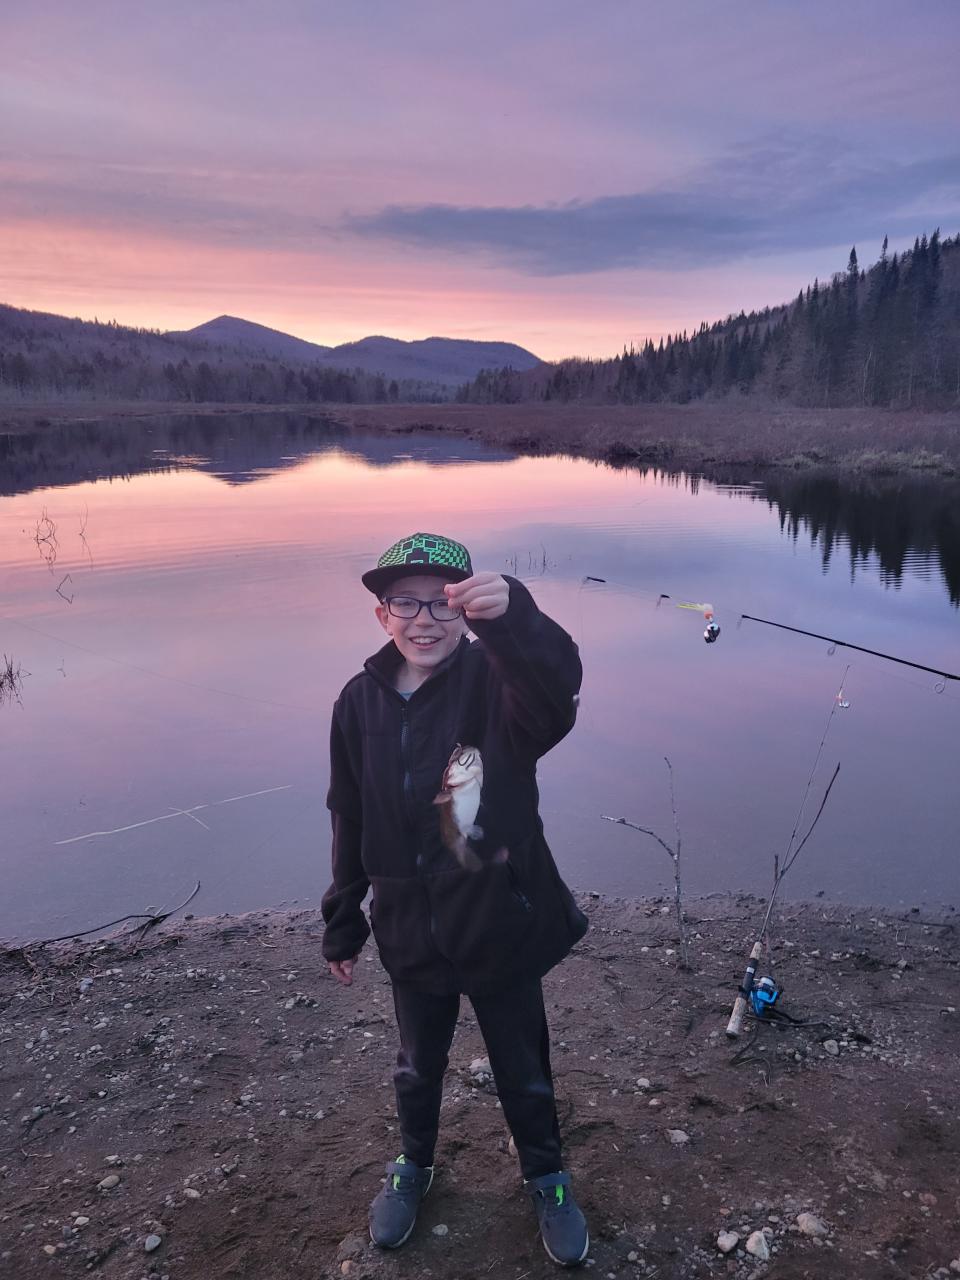 A child holds up a freshly caught fish at sunset